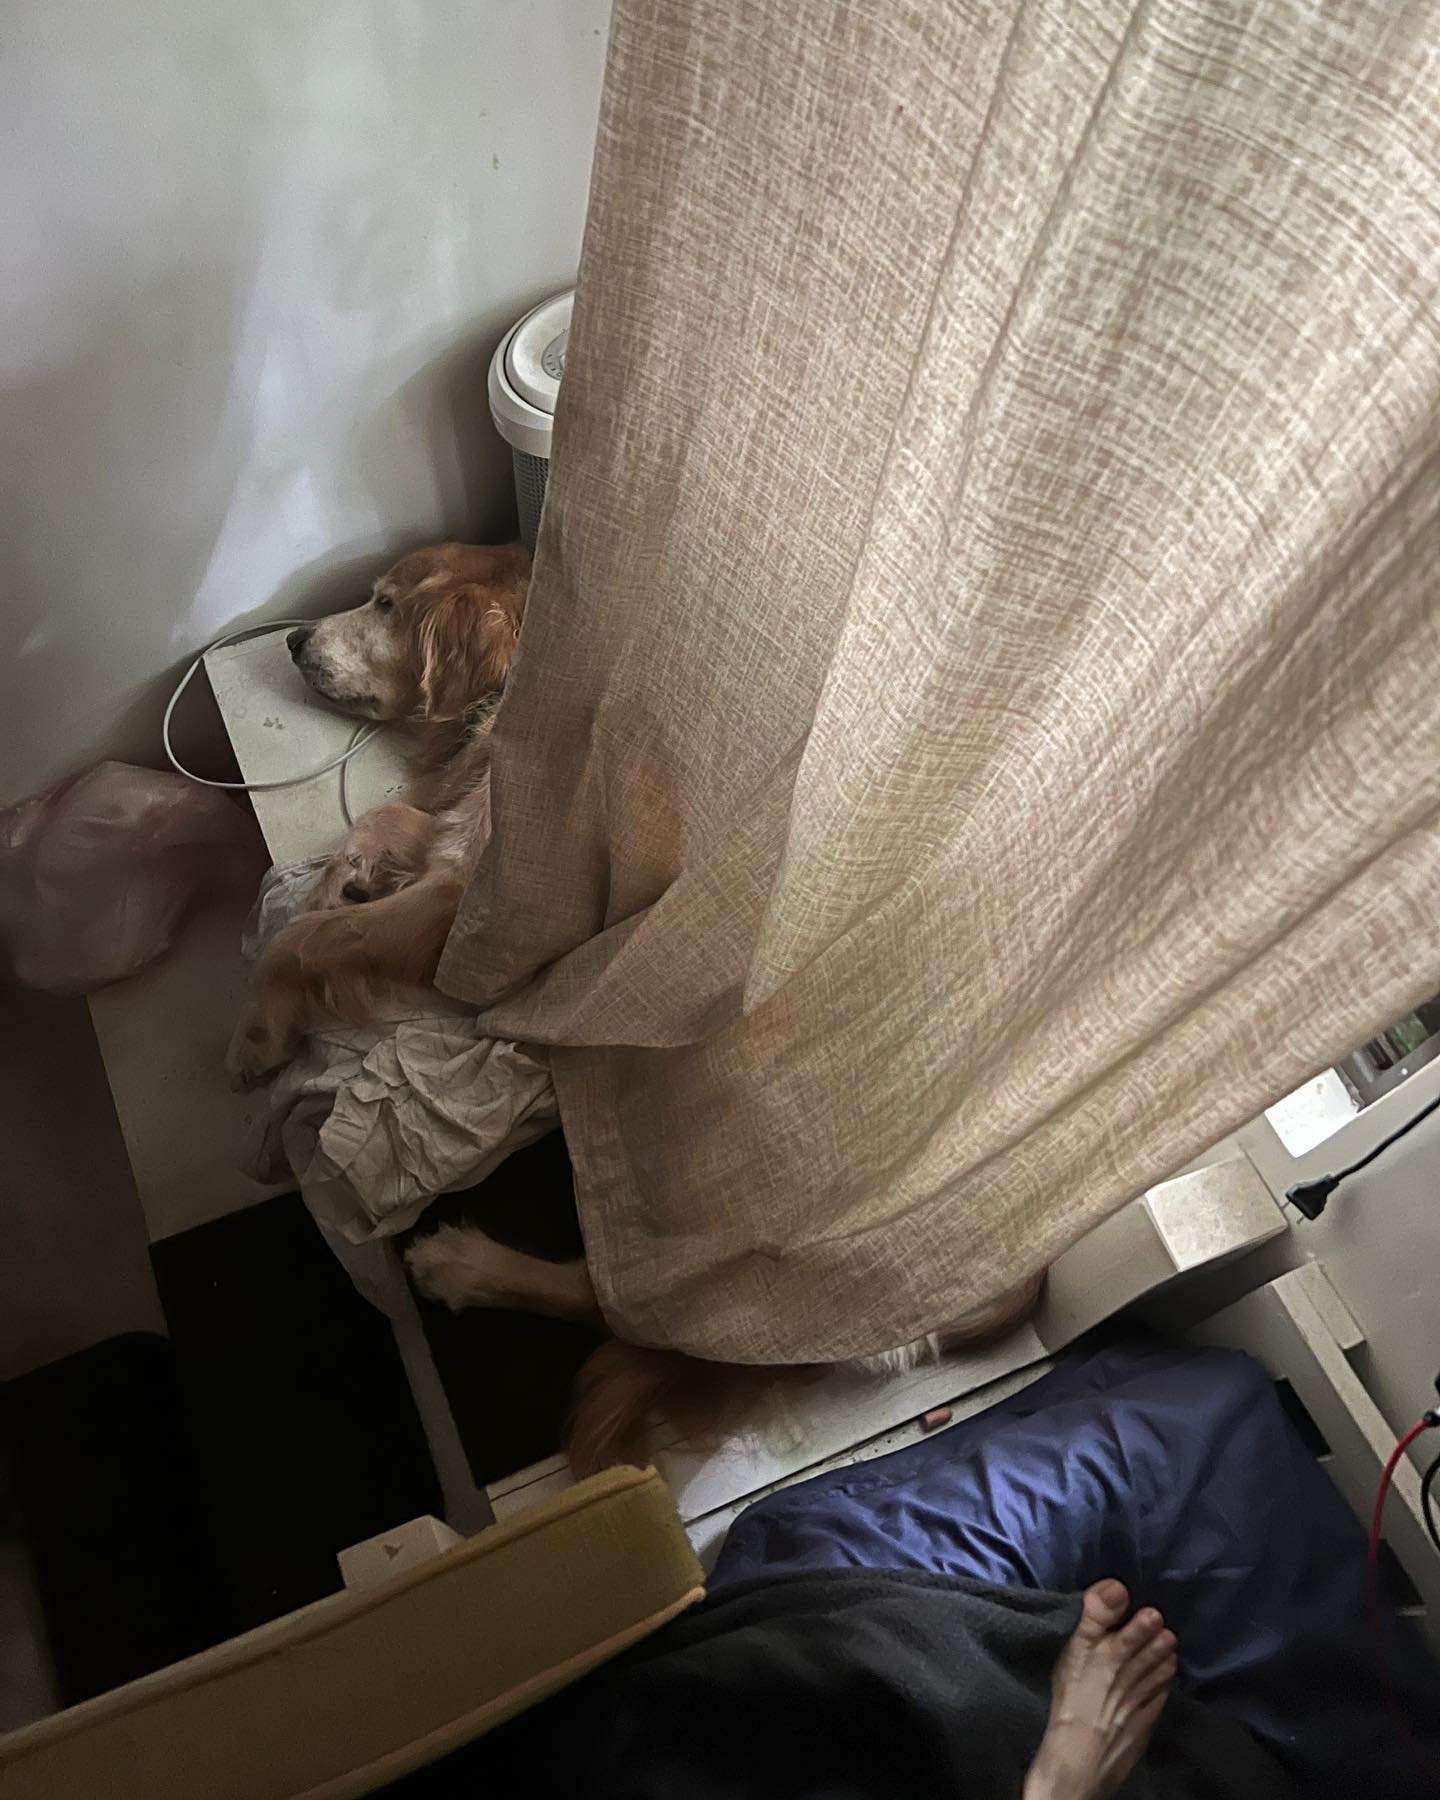 Found him like this earlier. I think he misses sleeping beside me on the bed and he probably got scared of the rain this morning. He copies our cat by trying to hide behind the curtains when he gets scared. 🥺#mrjackthegr #goldenretriever